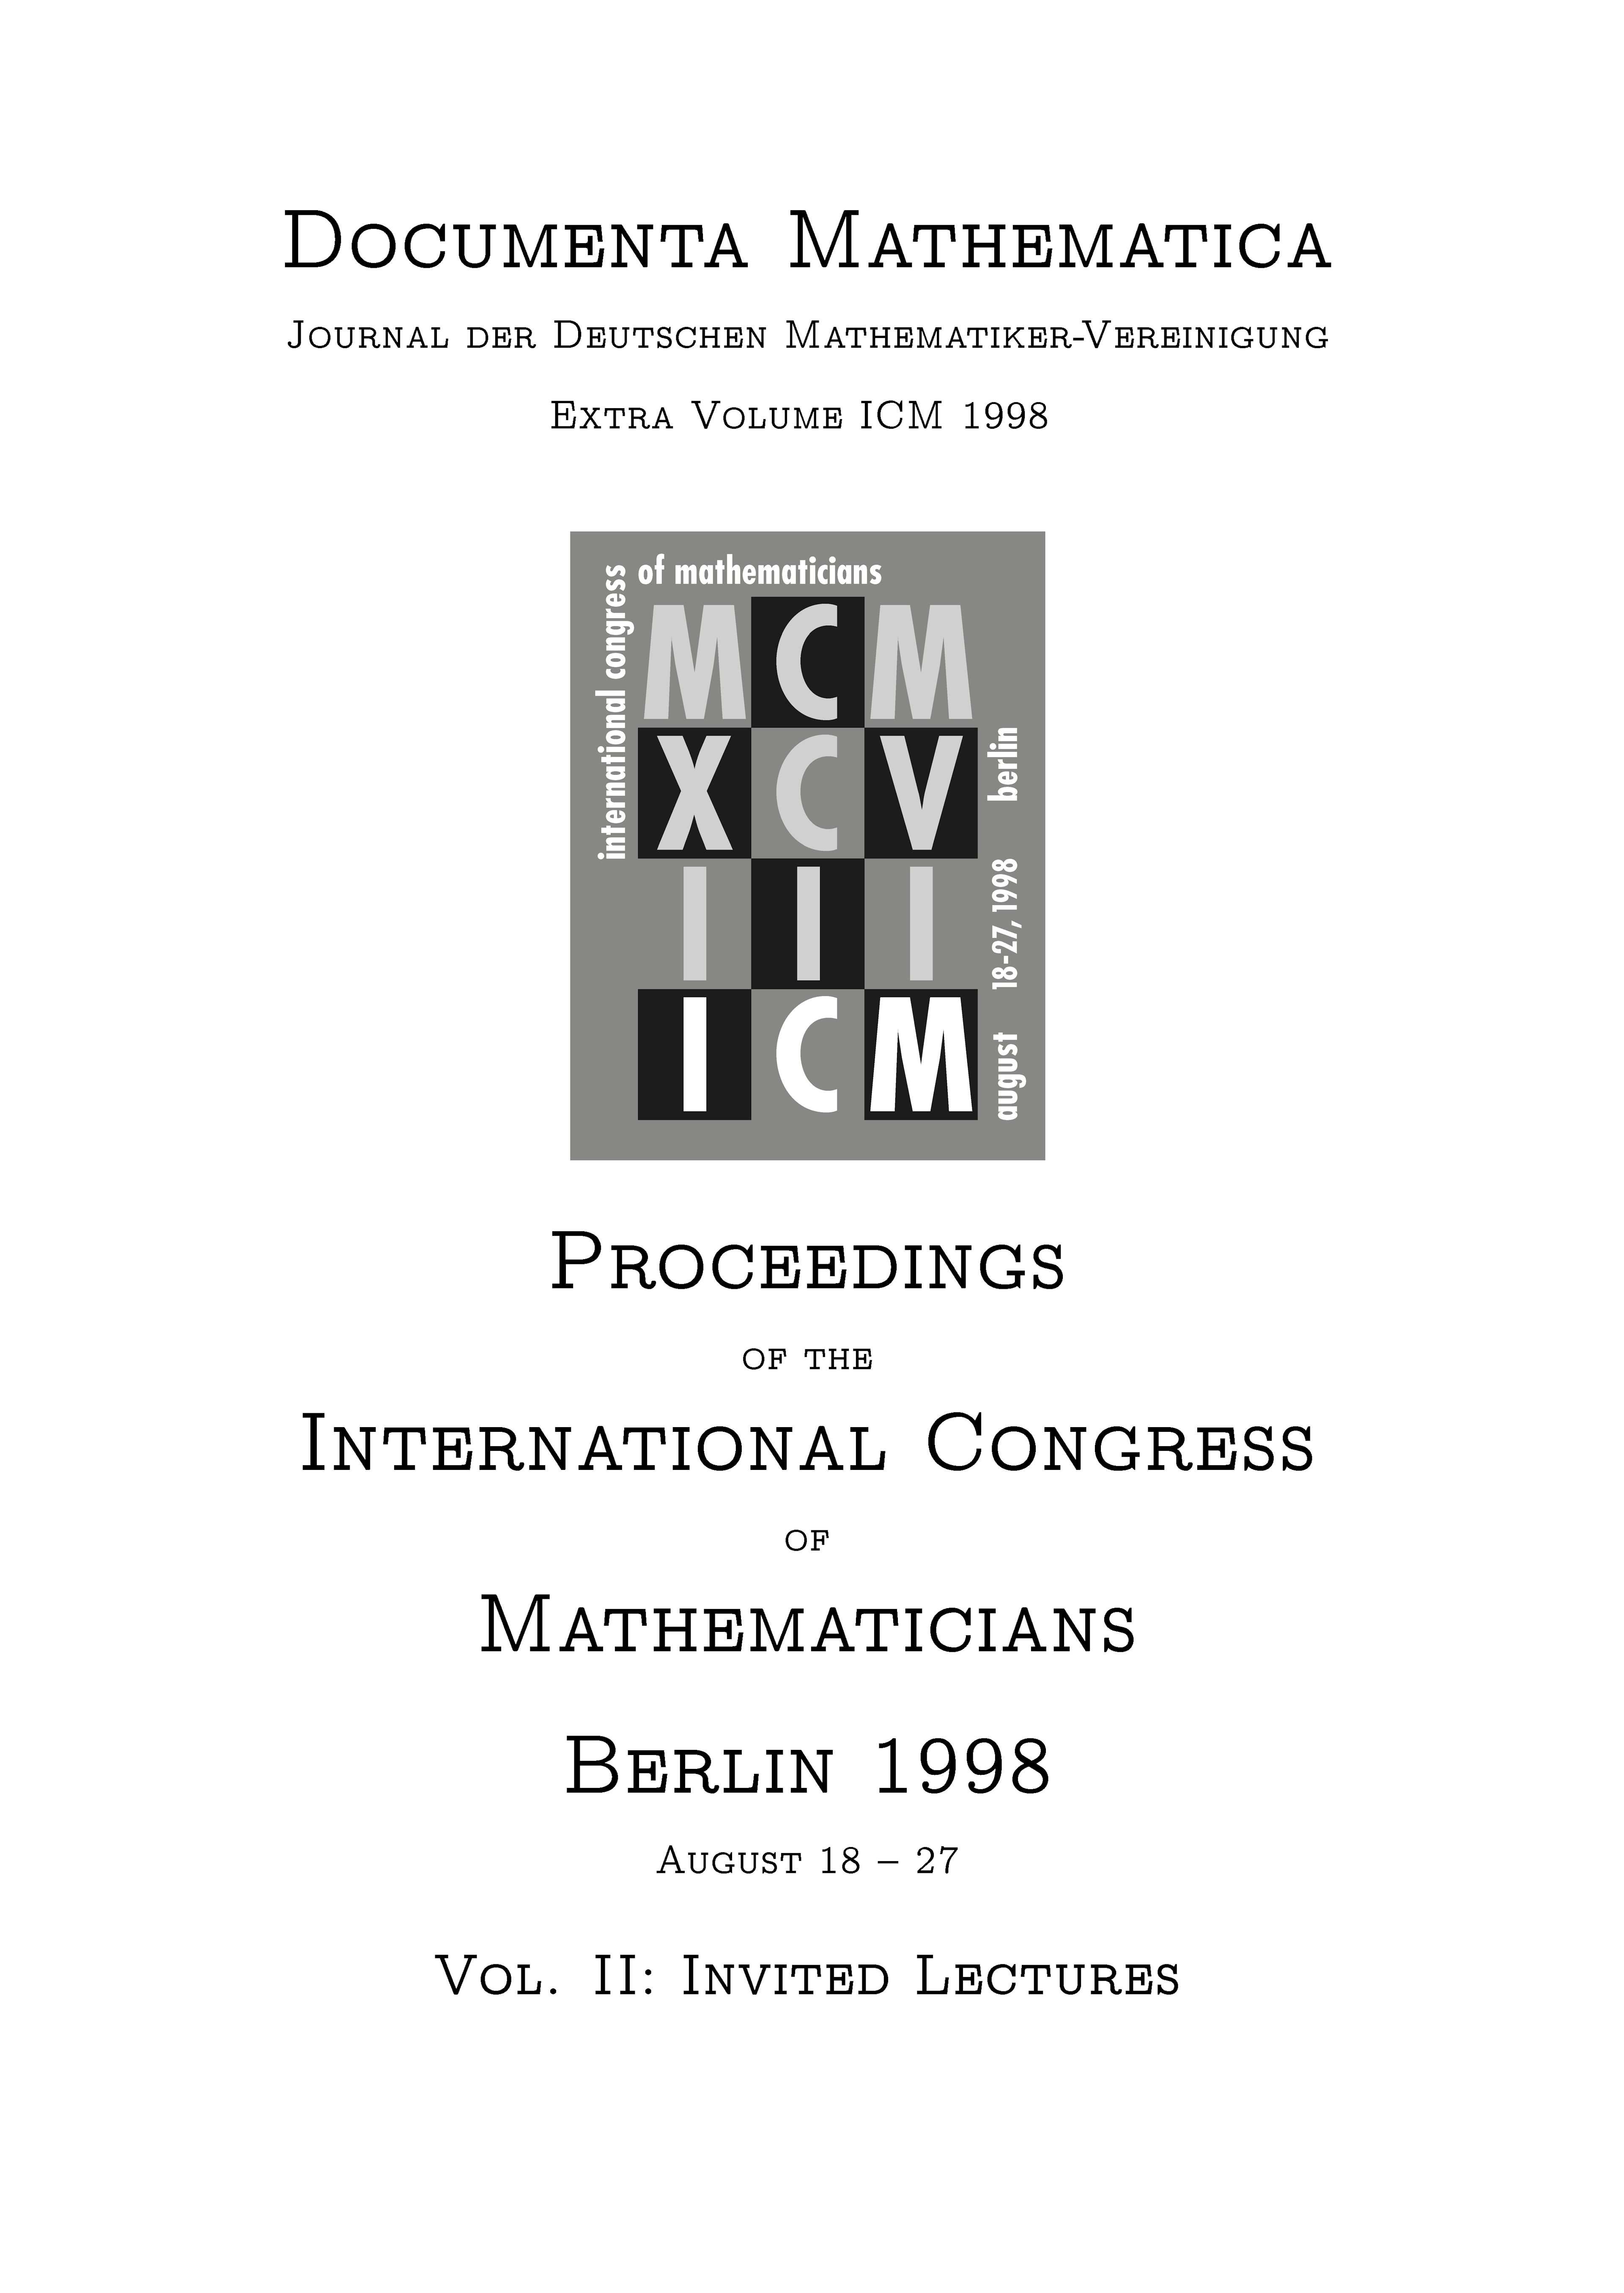 Functional calculus of Lie groups and wave propagation cover